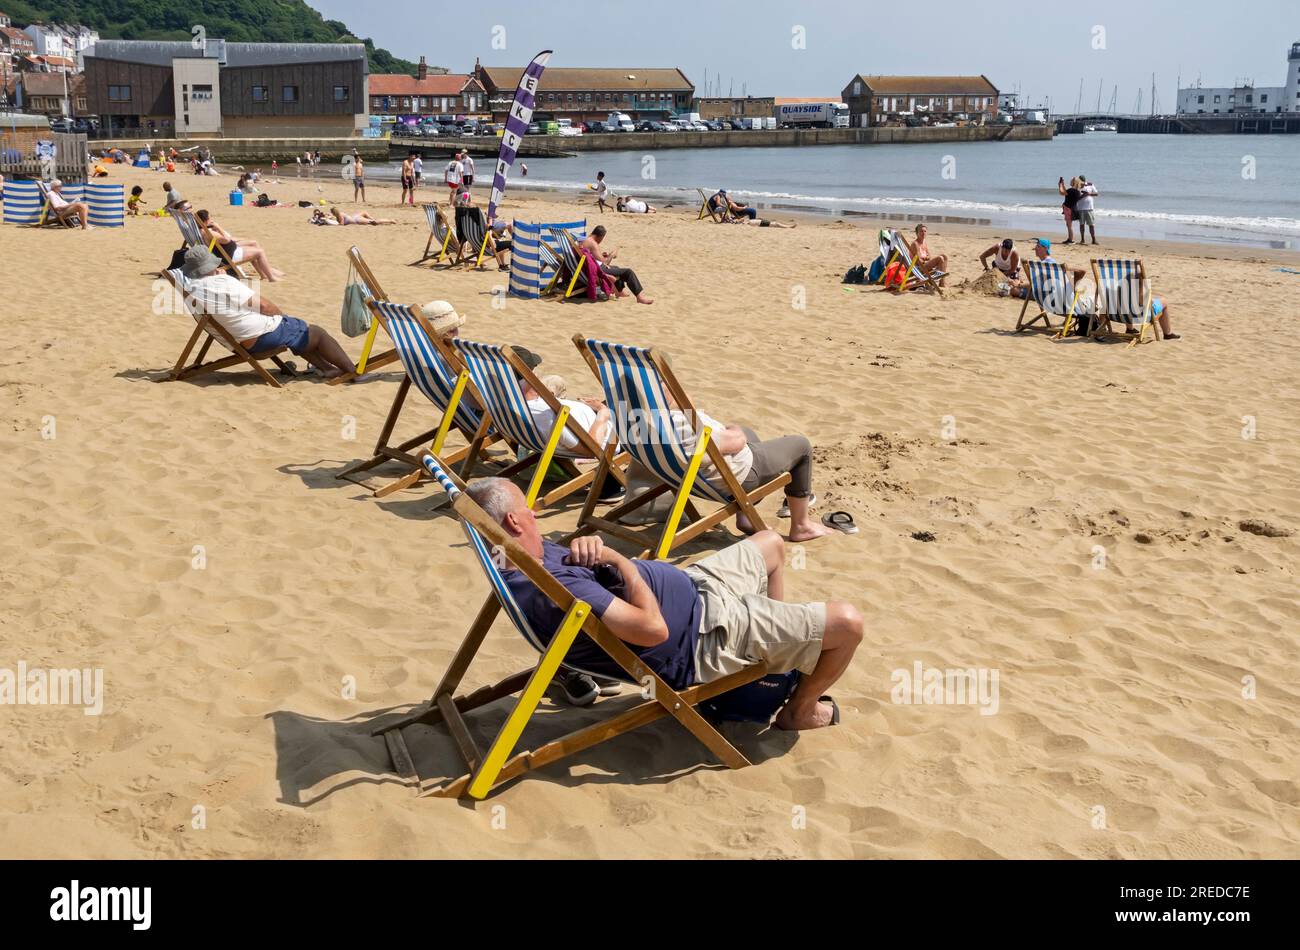 People tourists visitors relaxing on deckchairs South Bay beach in summer Scarborough North Yorkshire England UK United Kingdom GB Great Britain Stock Photo